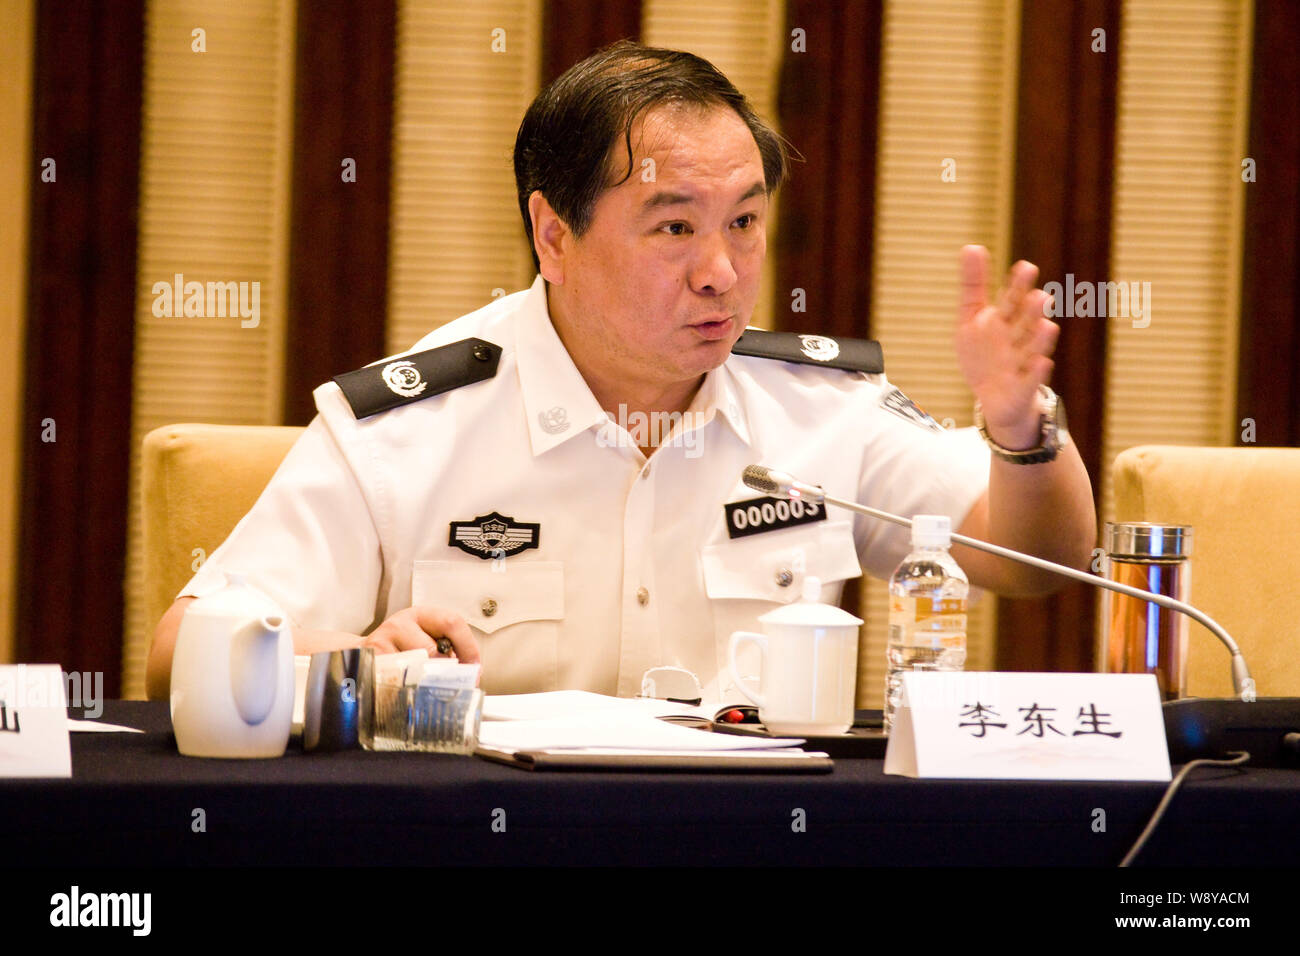 --FILE--Li Dongsheng, then Vice-Minister of Public Security of the Peoples Repulic of China, speaks at a meeting in Beijing, China, 19 June 2012.   Li Stock Photo